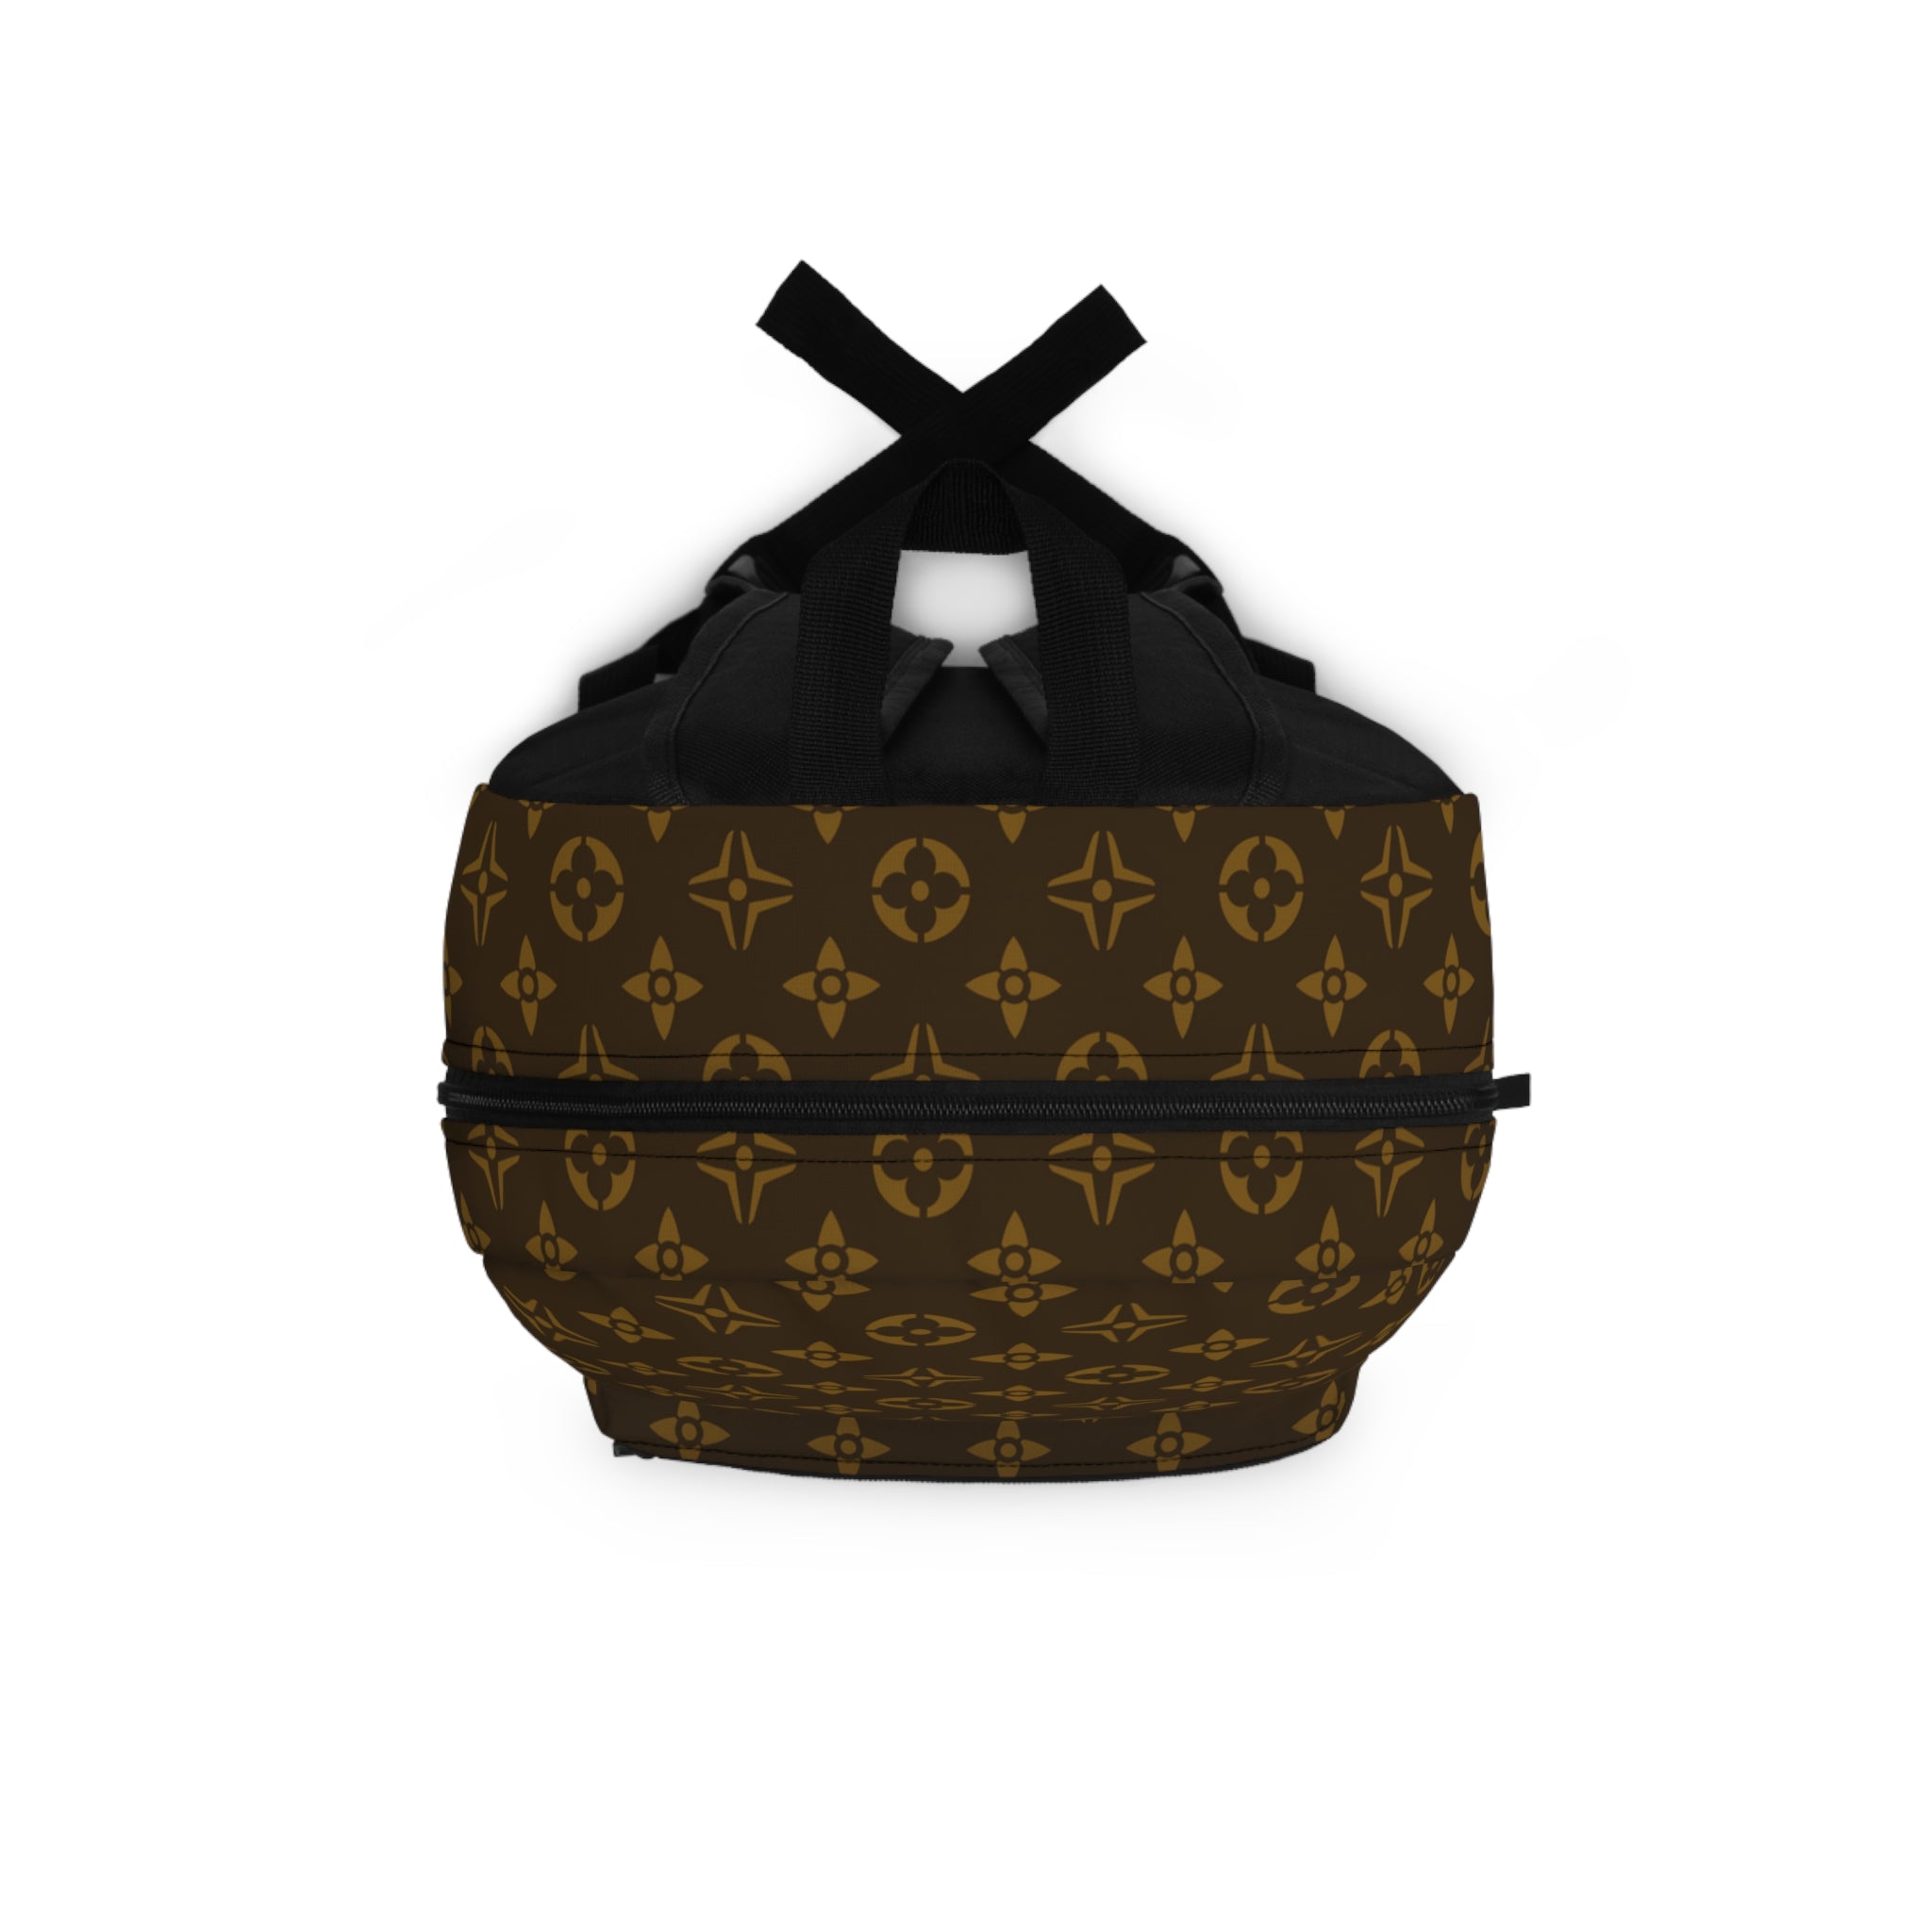  Casual Wear Accessories in Brown Icons Backpack, Unisex Backpack Bags